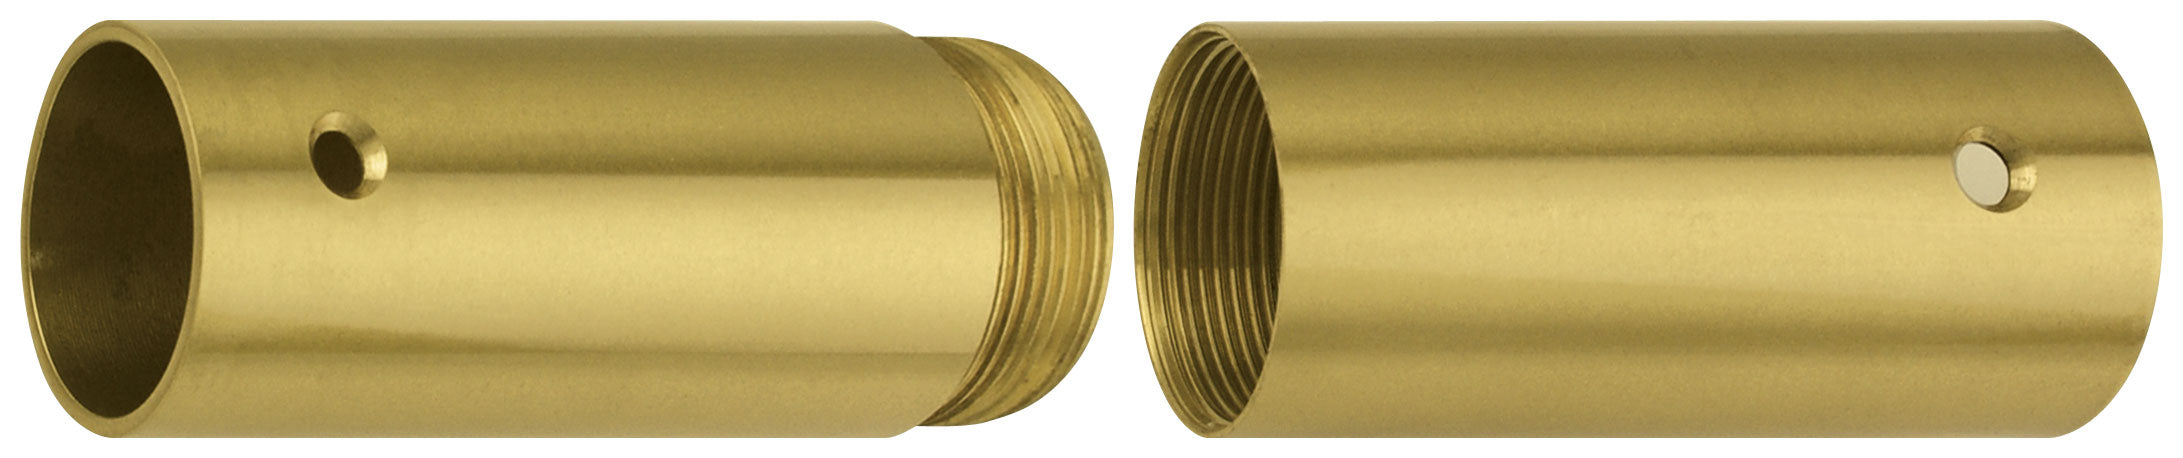 Brass Screw Joint for Wood Flagpoles